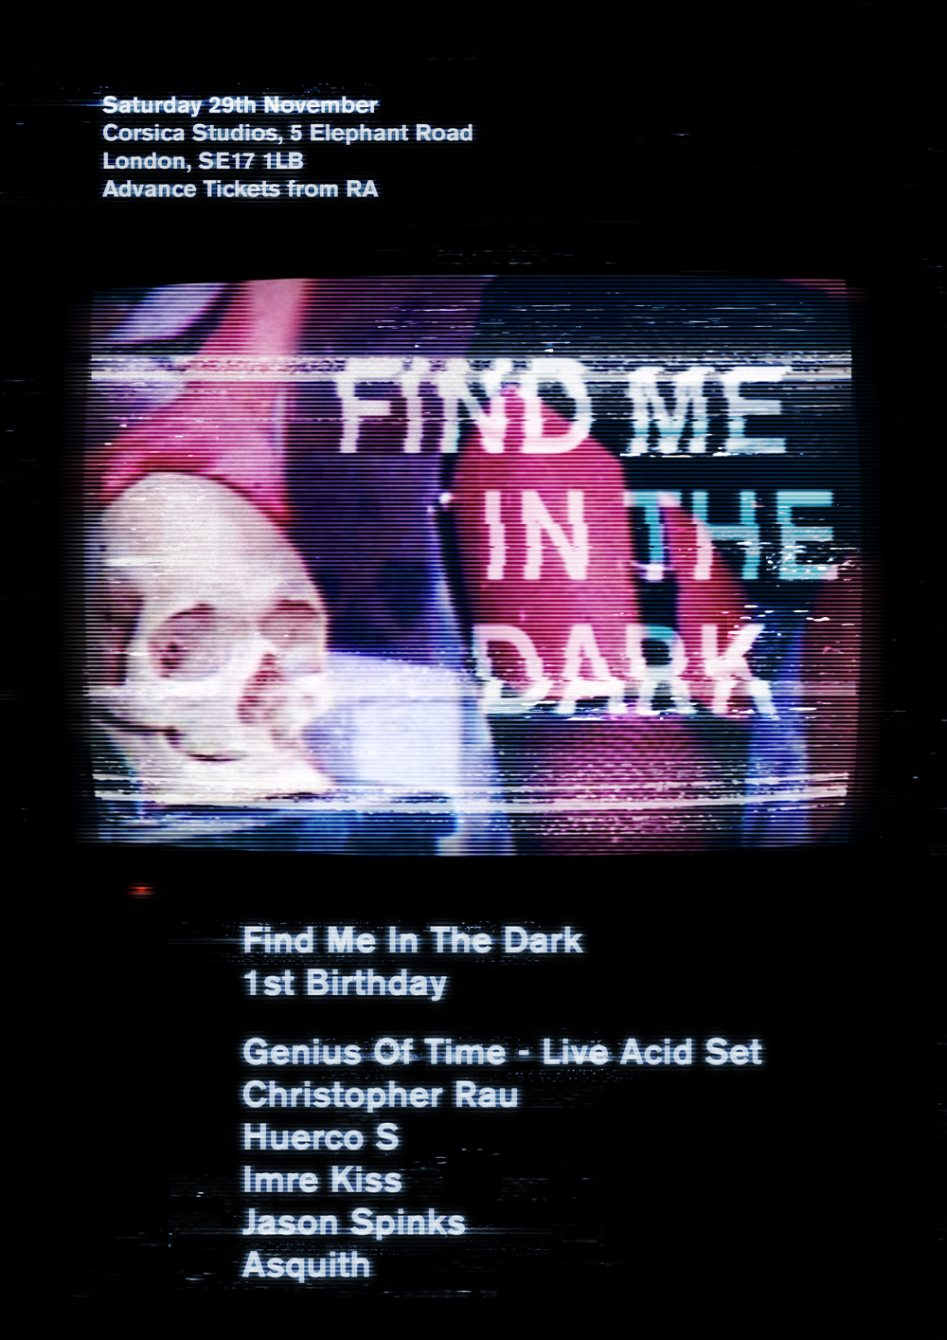 Find Me In The Dark 1st Birthday with Genius Of Time, Christopher Rau, Huerco S, and More - Flyer front